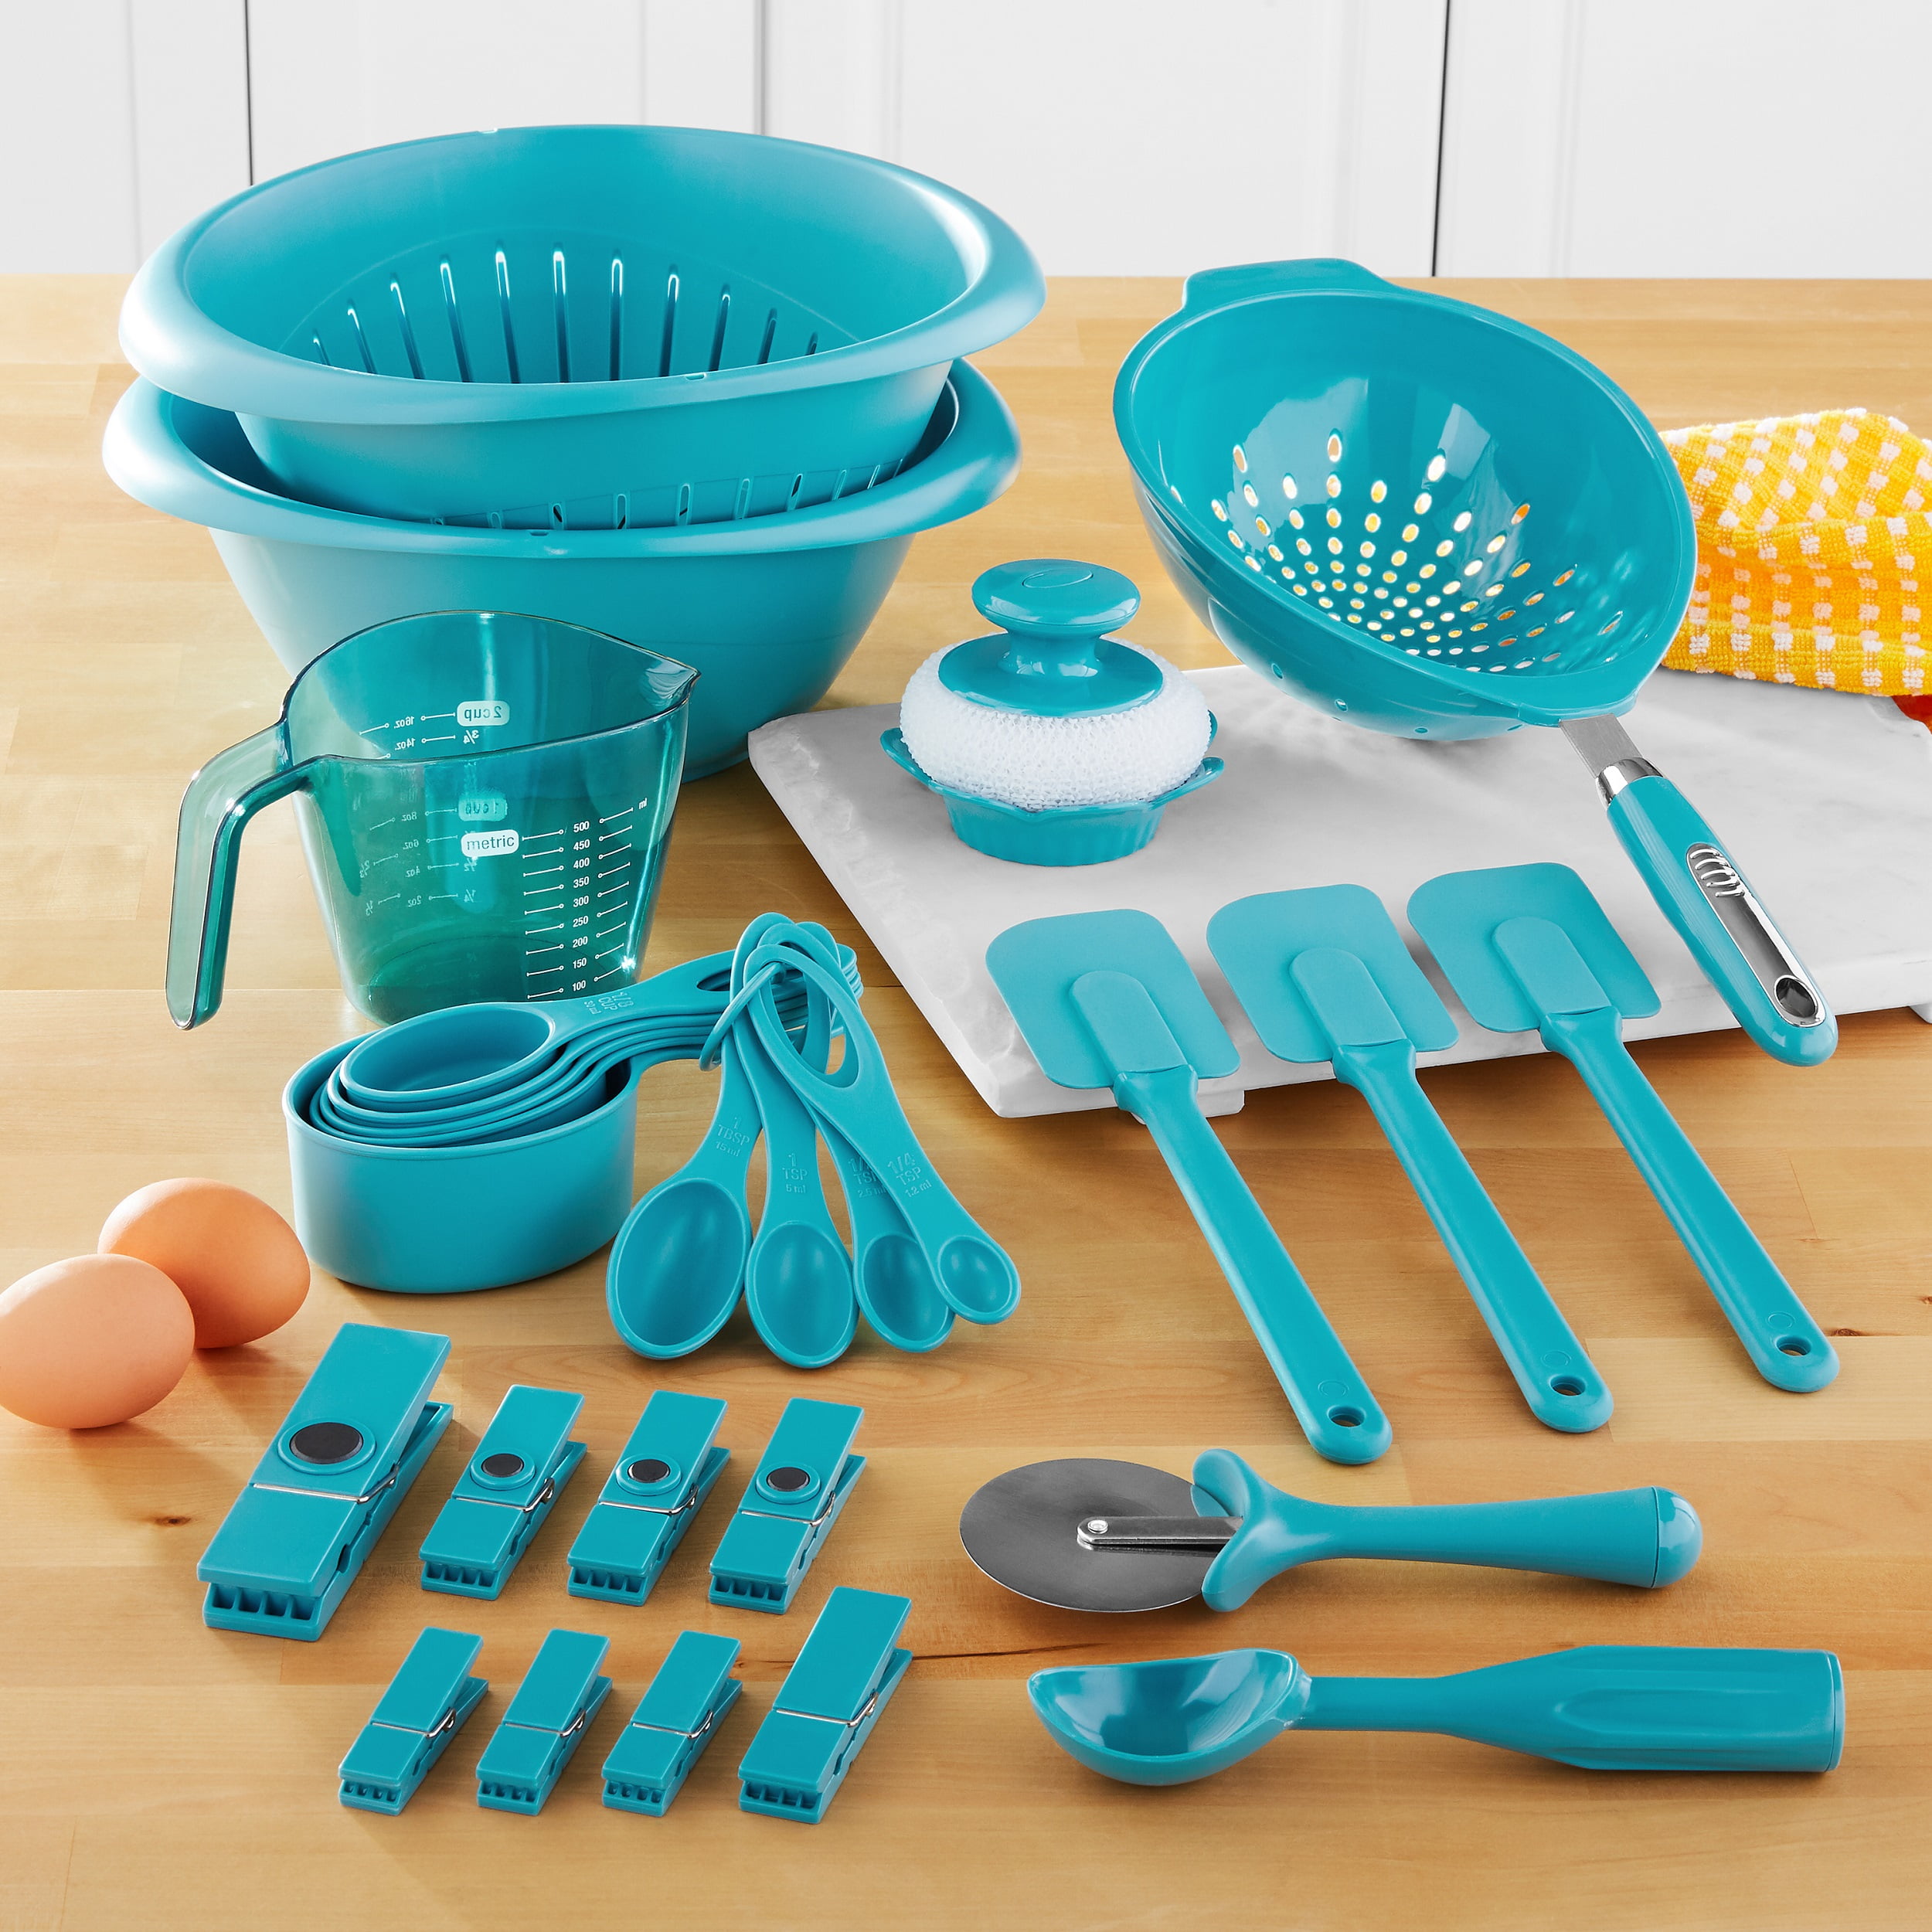 Kitchen products by Morph